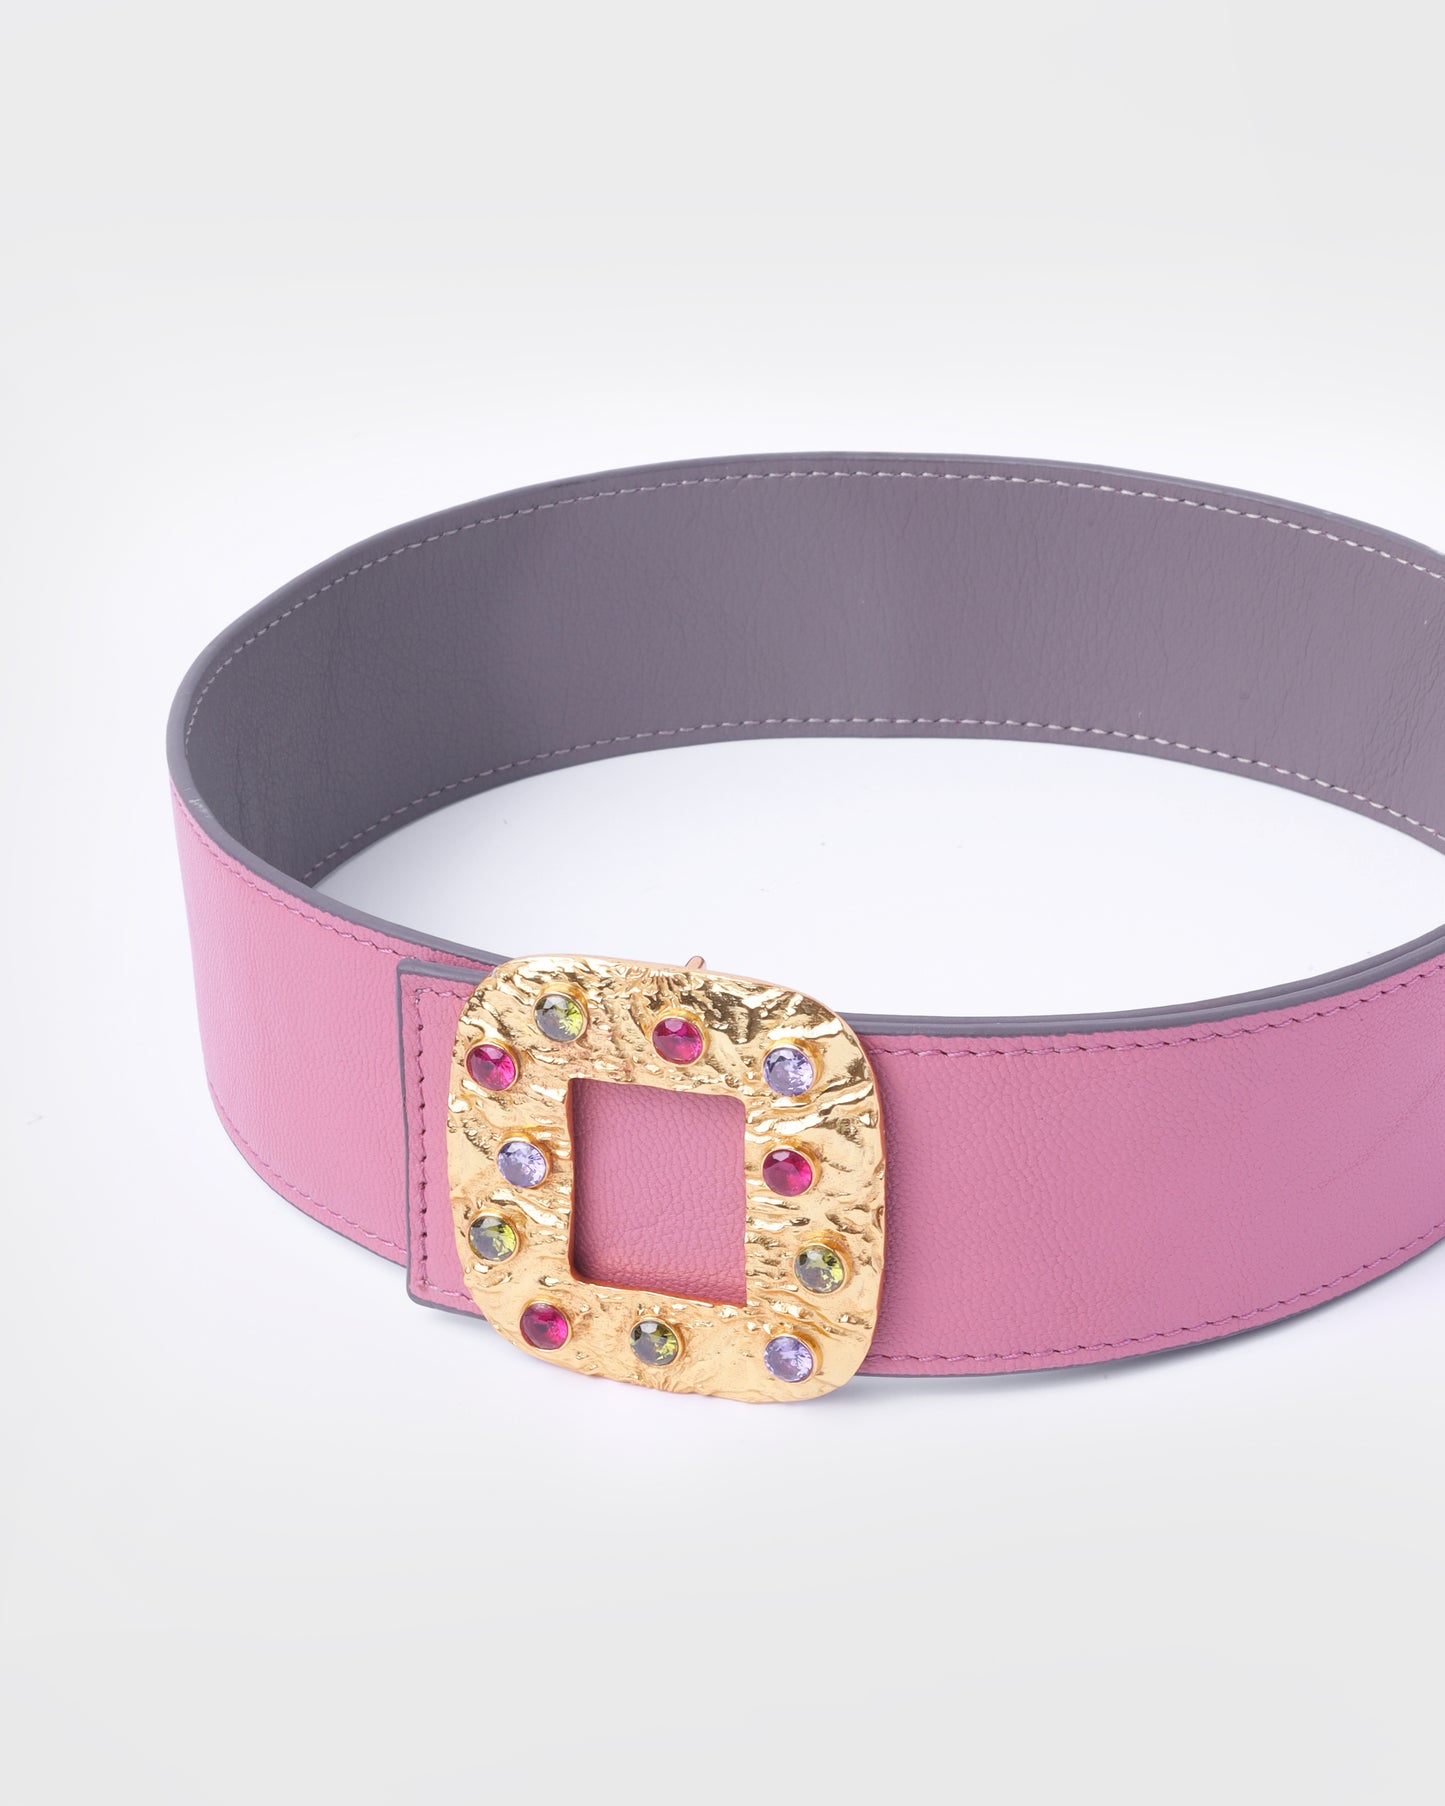 50 mm Reversible Belt with Buckle (leather)